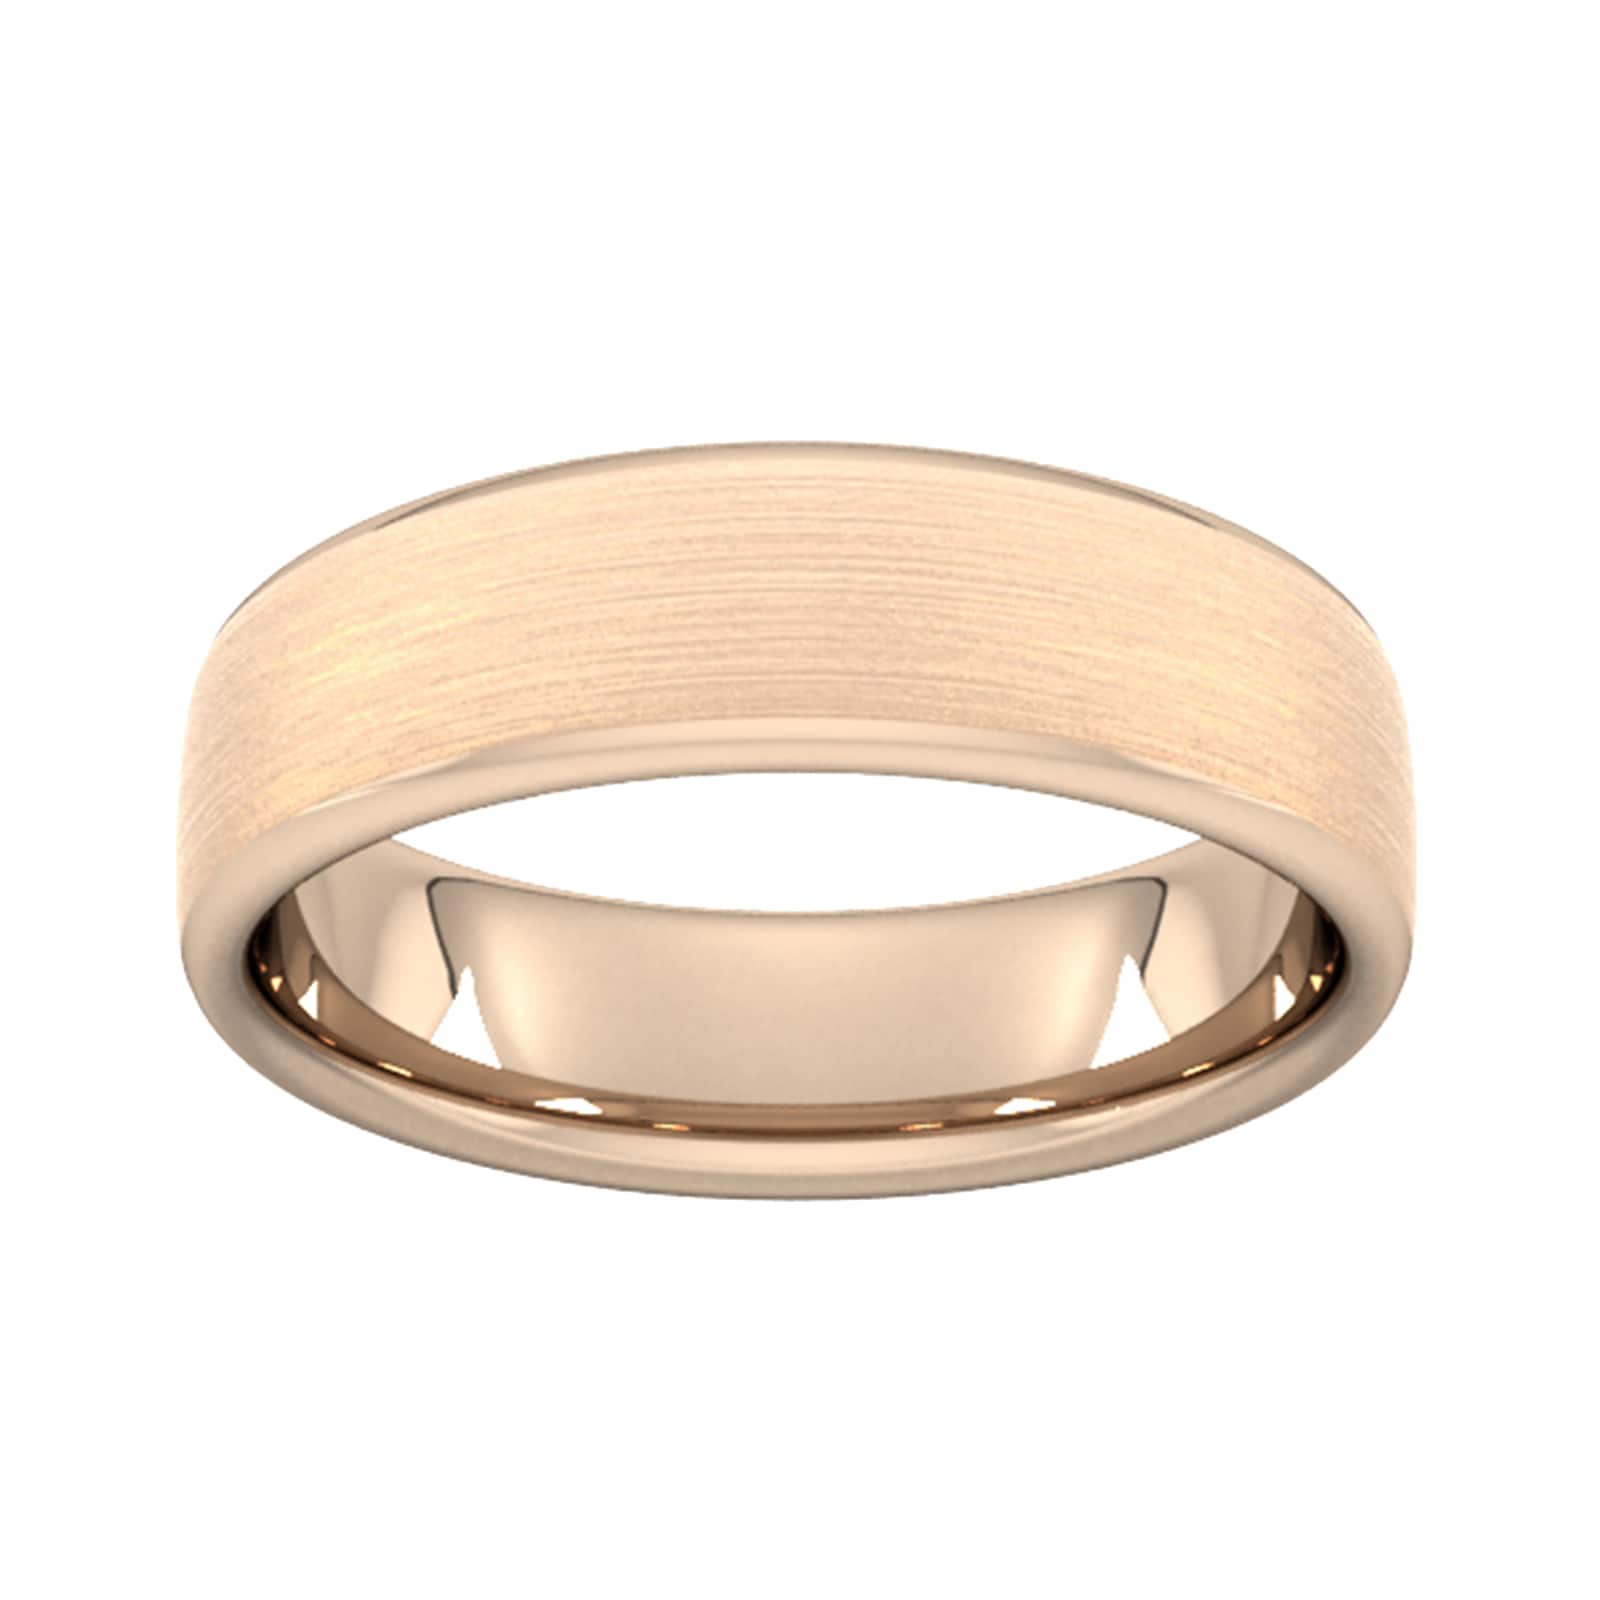 6mm Traditional Court Standard Matt Finished Wedding Ring In 18 Carat Rose Gold - Ring Size N